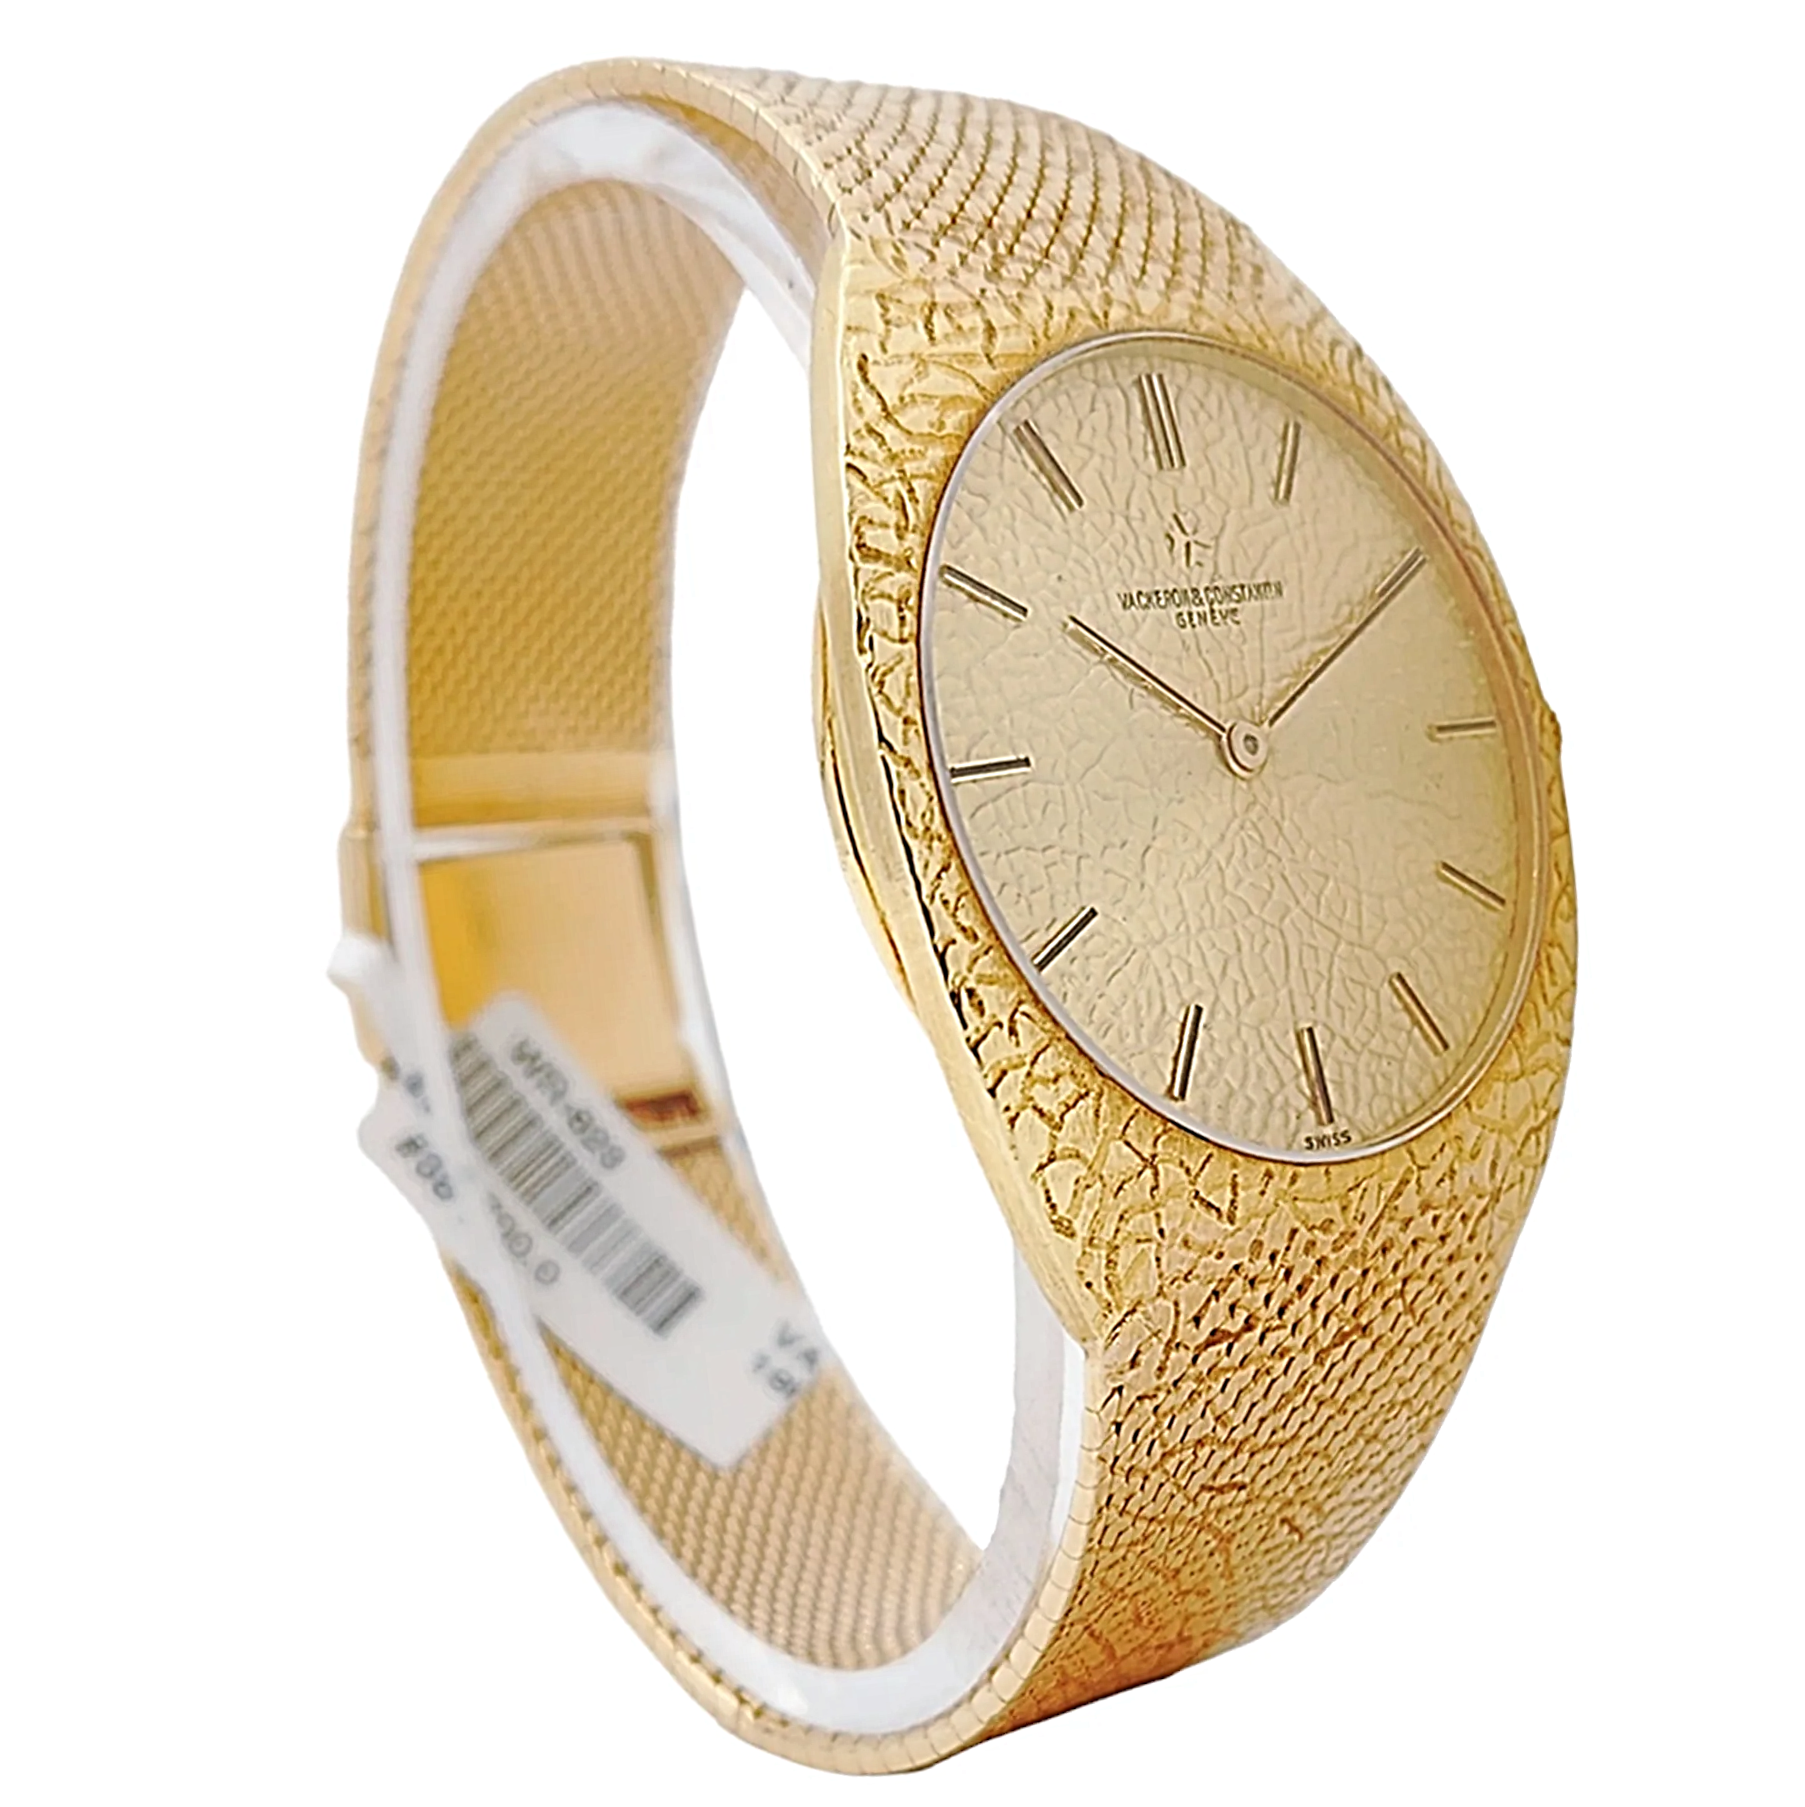 *1970's Men's Vacheron & Constantin 33mm Vintage Solid 18K Yellow Gold Watch with Gold Dial. (Pre-Owned)